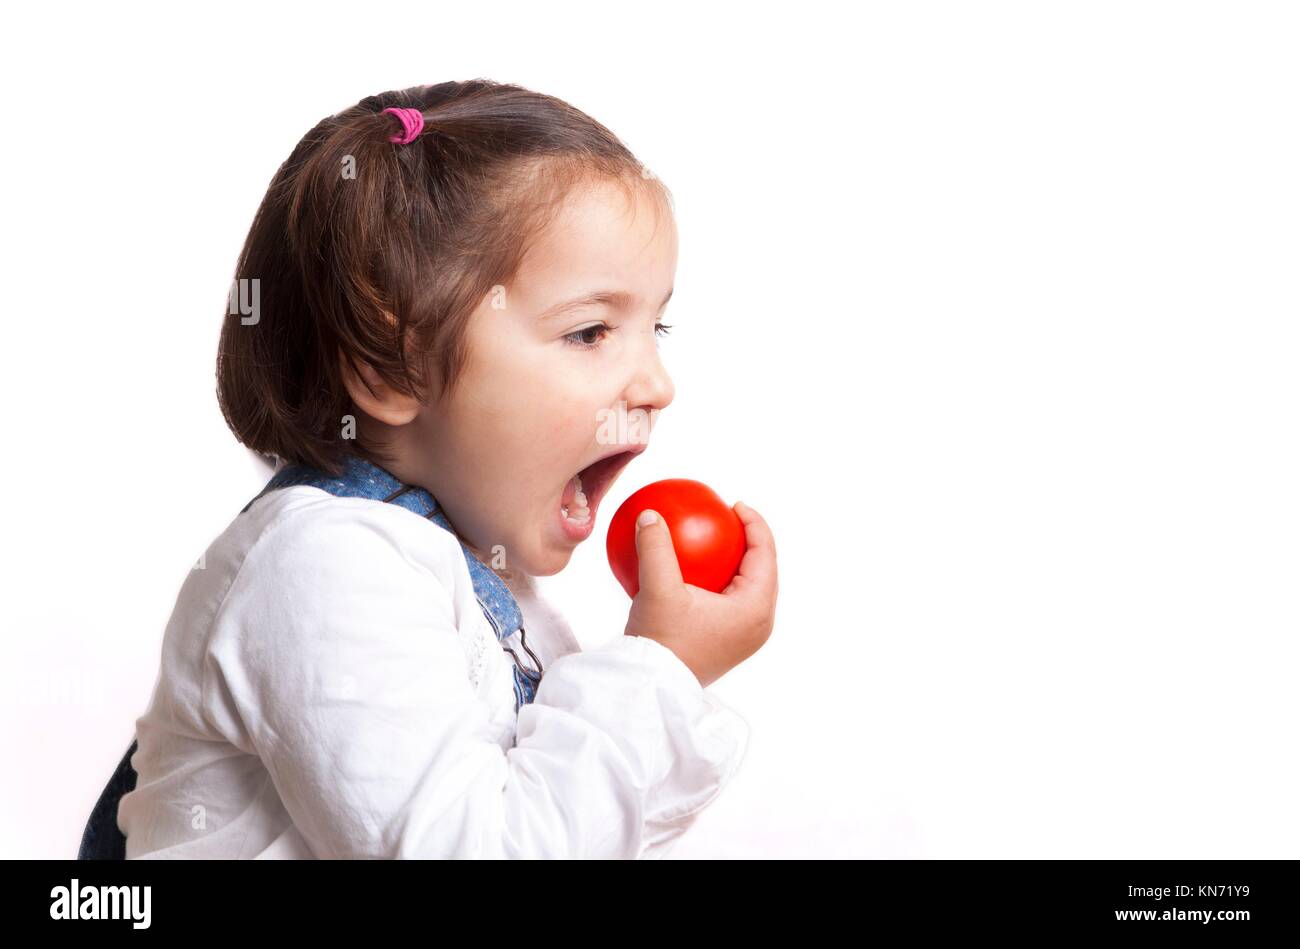 Portrait of happy girl holding a tomato. Isolated over white background. Stock Photo